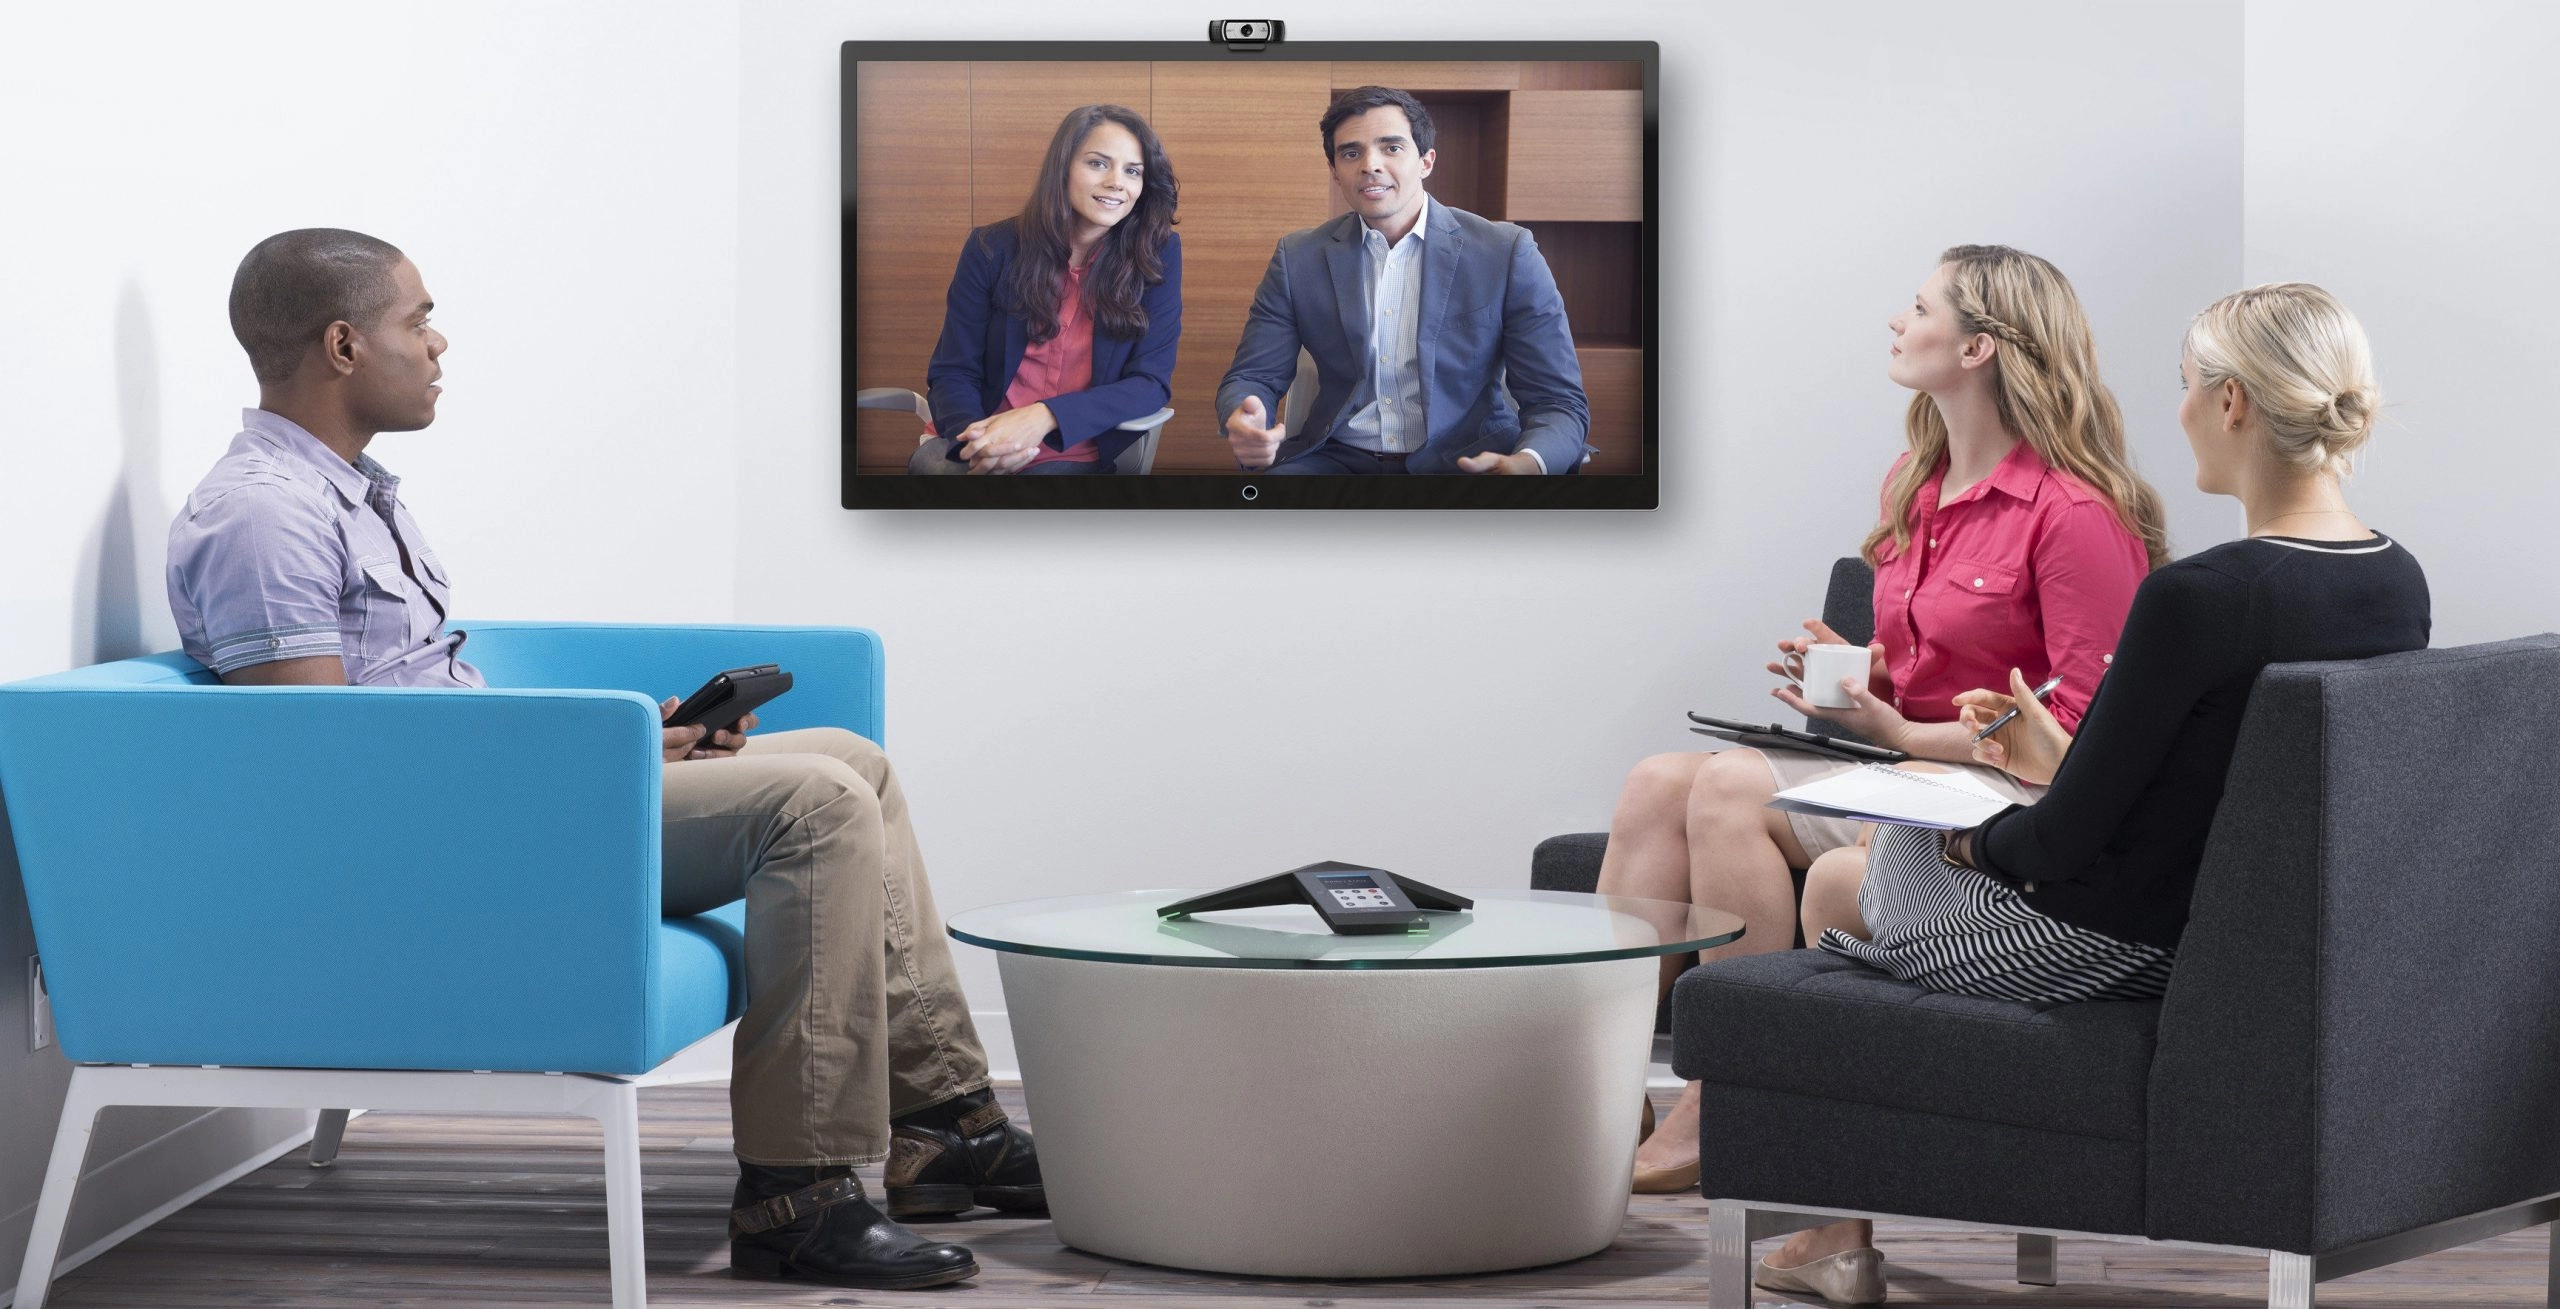 video conference systems optimized for Microsoft Teams and Skype for Business video conferencing